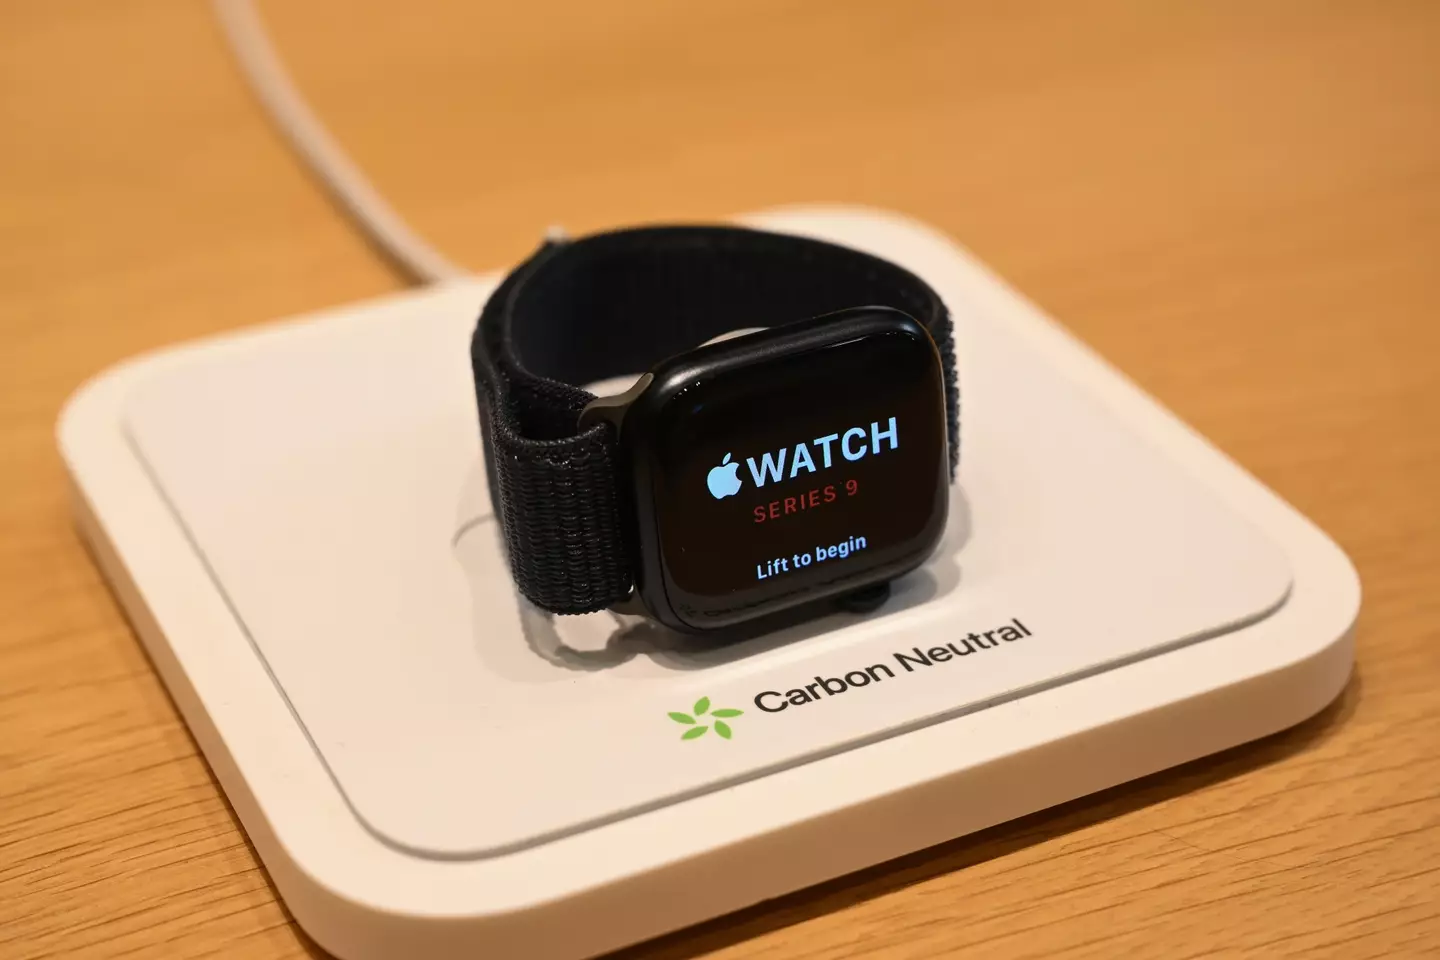 Apple Watch users have complained that it's getting so hot that it can't charge properly.